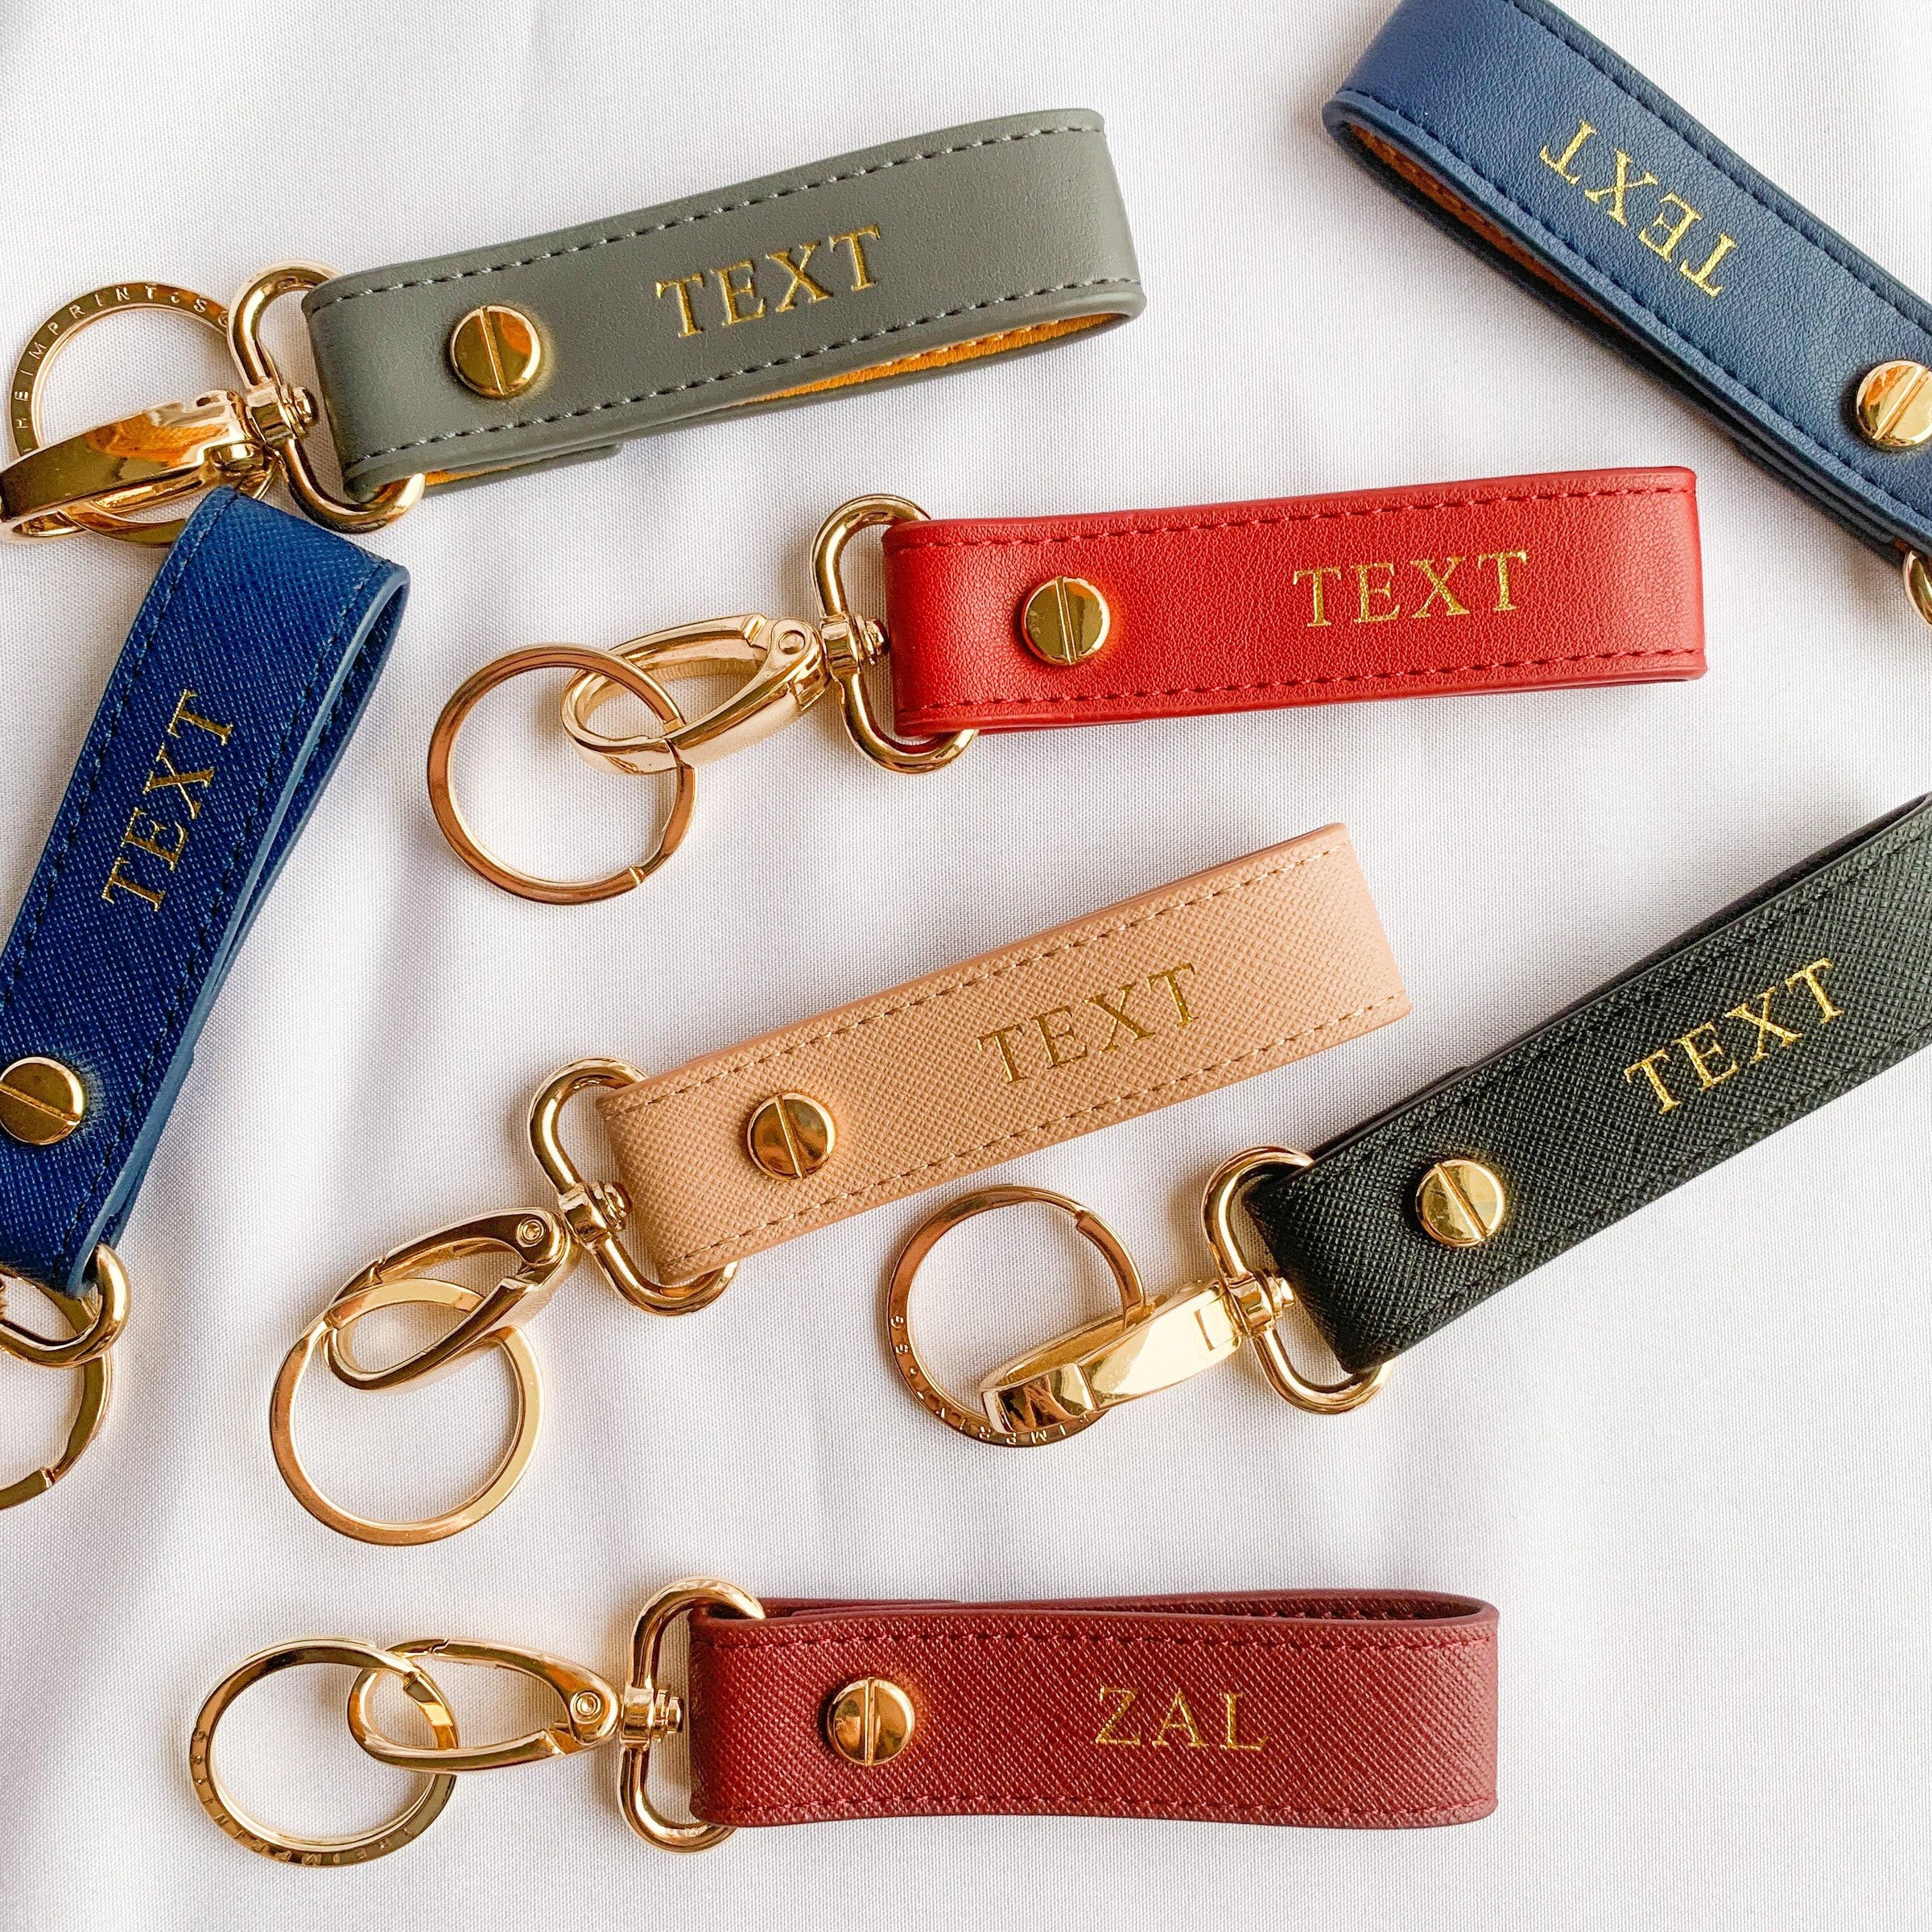 Personalised Leather Keychains - THEIMPRINT